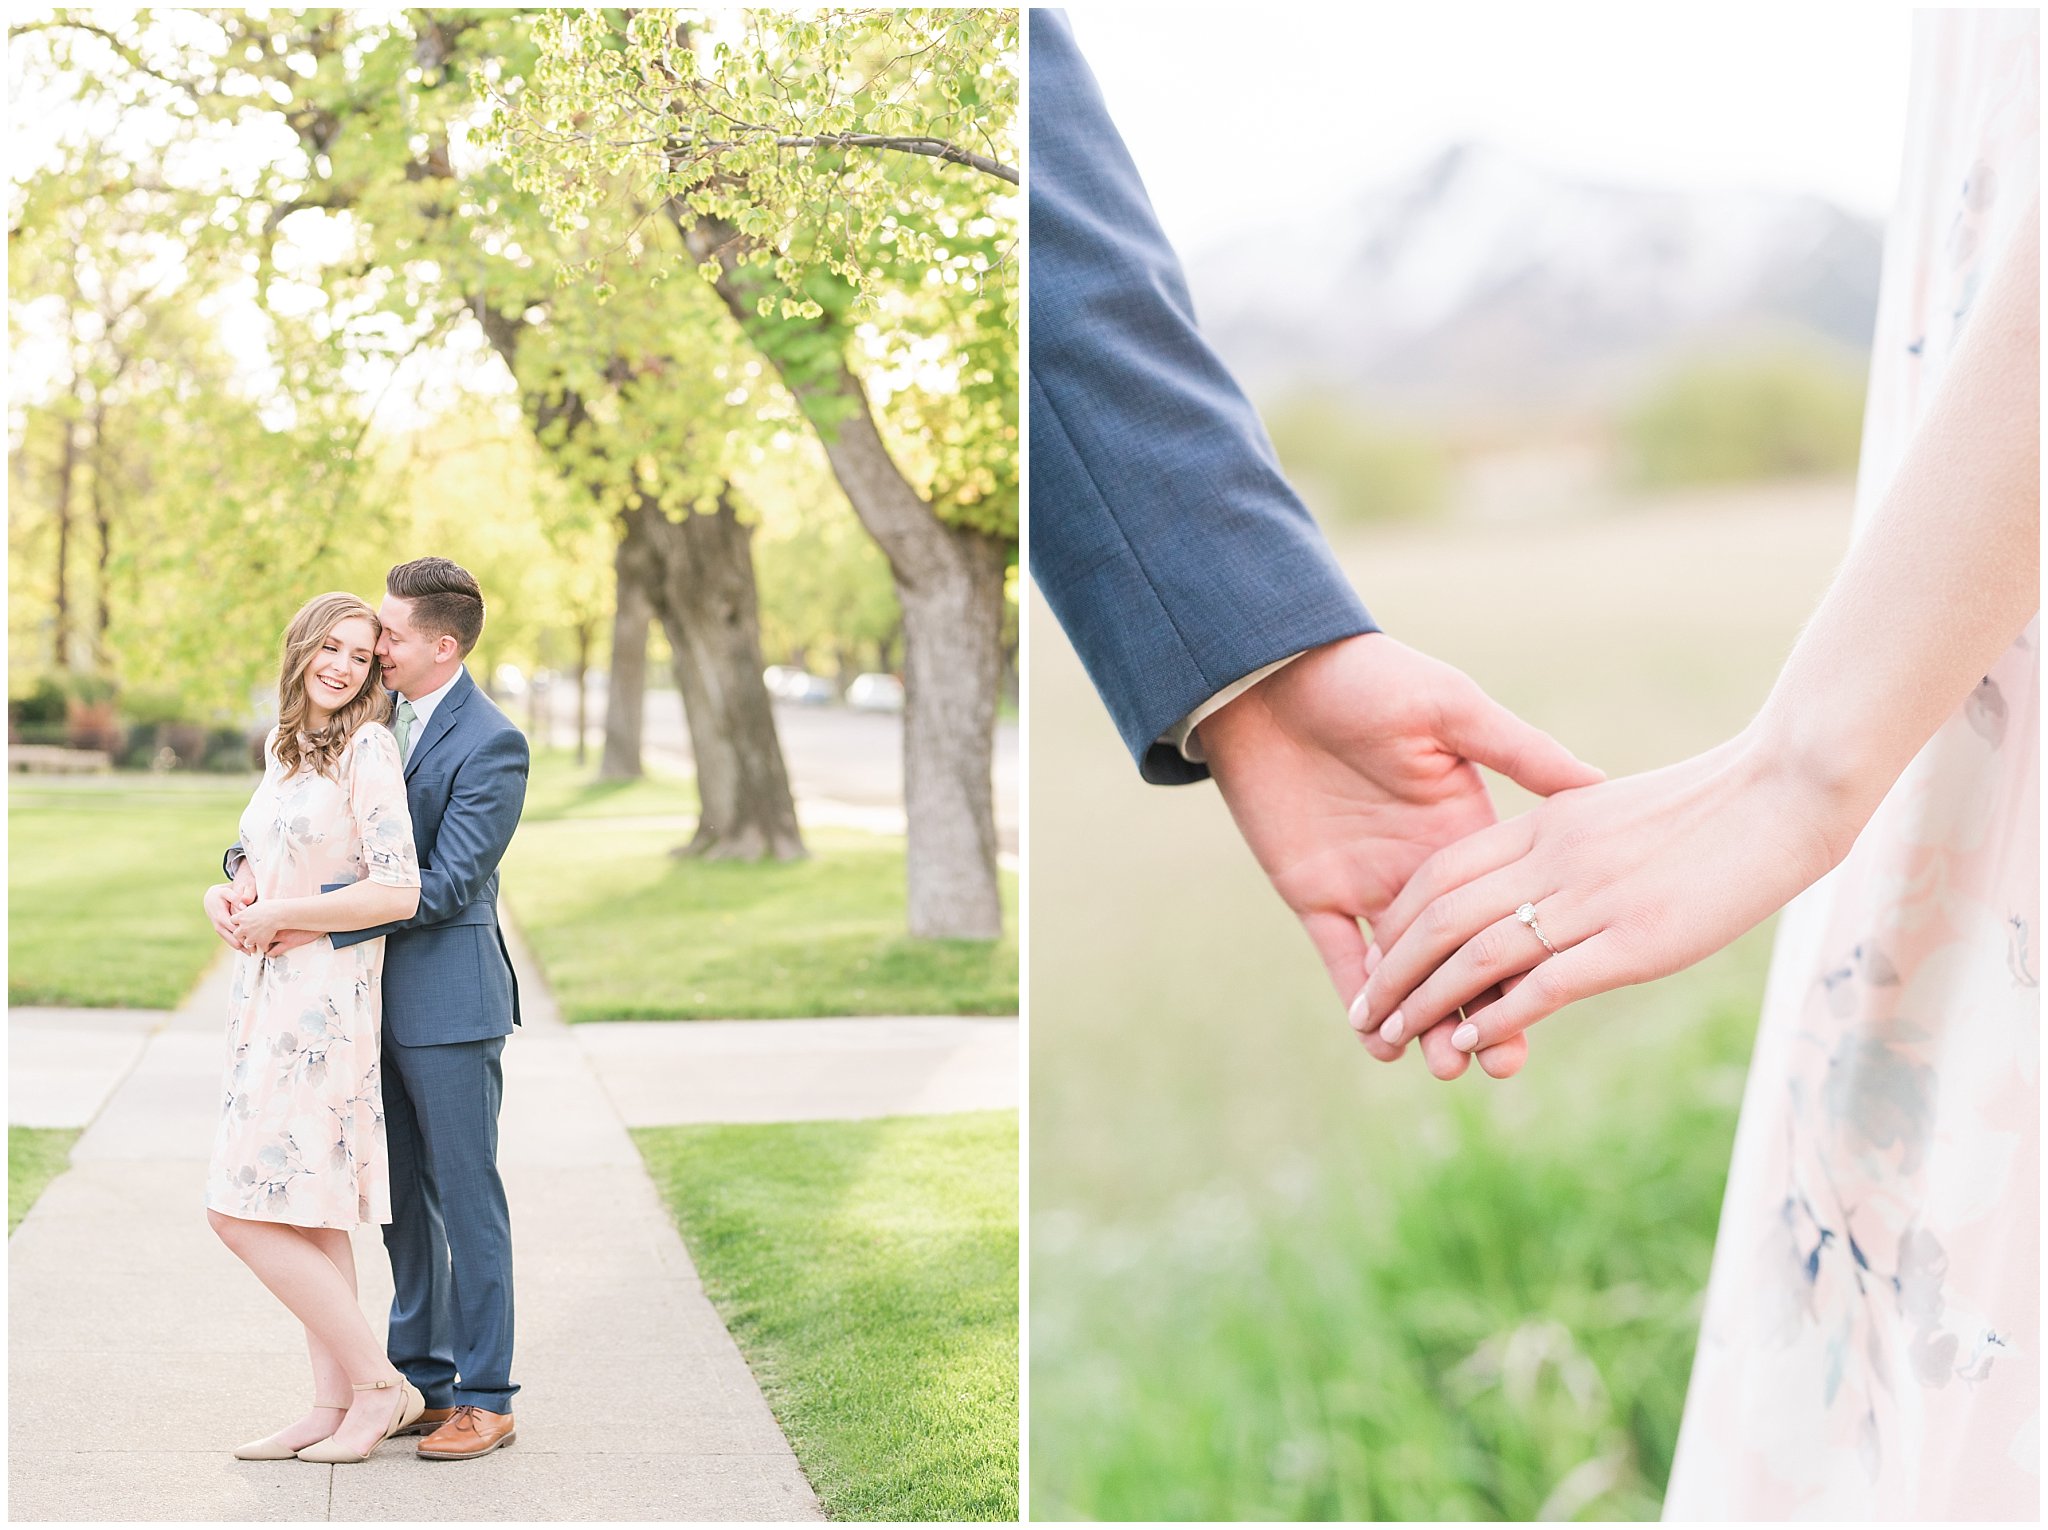 Couple dressed up in suit and dress for formal engagement session | Top Utah Wedding and Couples Photos 2019 | Jessie and Dallin Photography